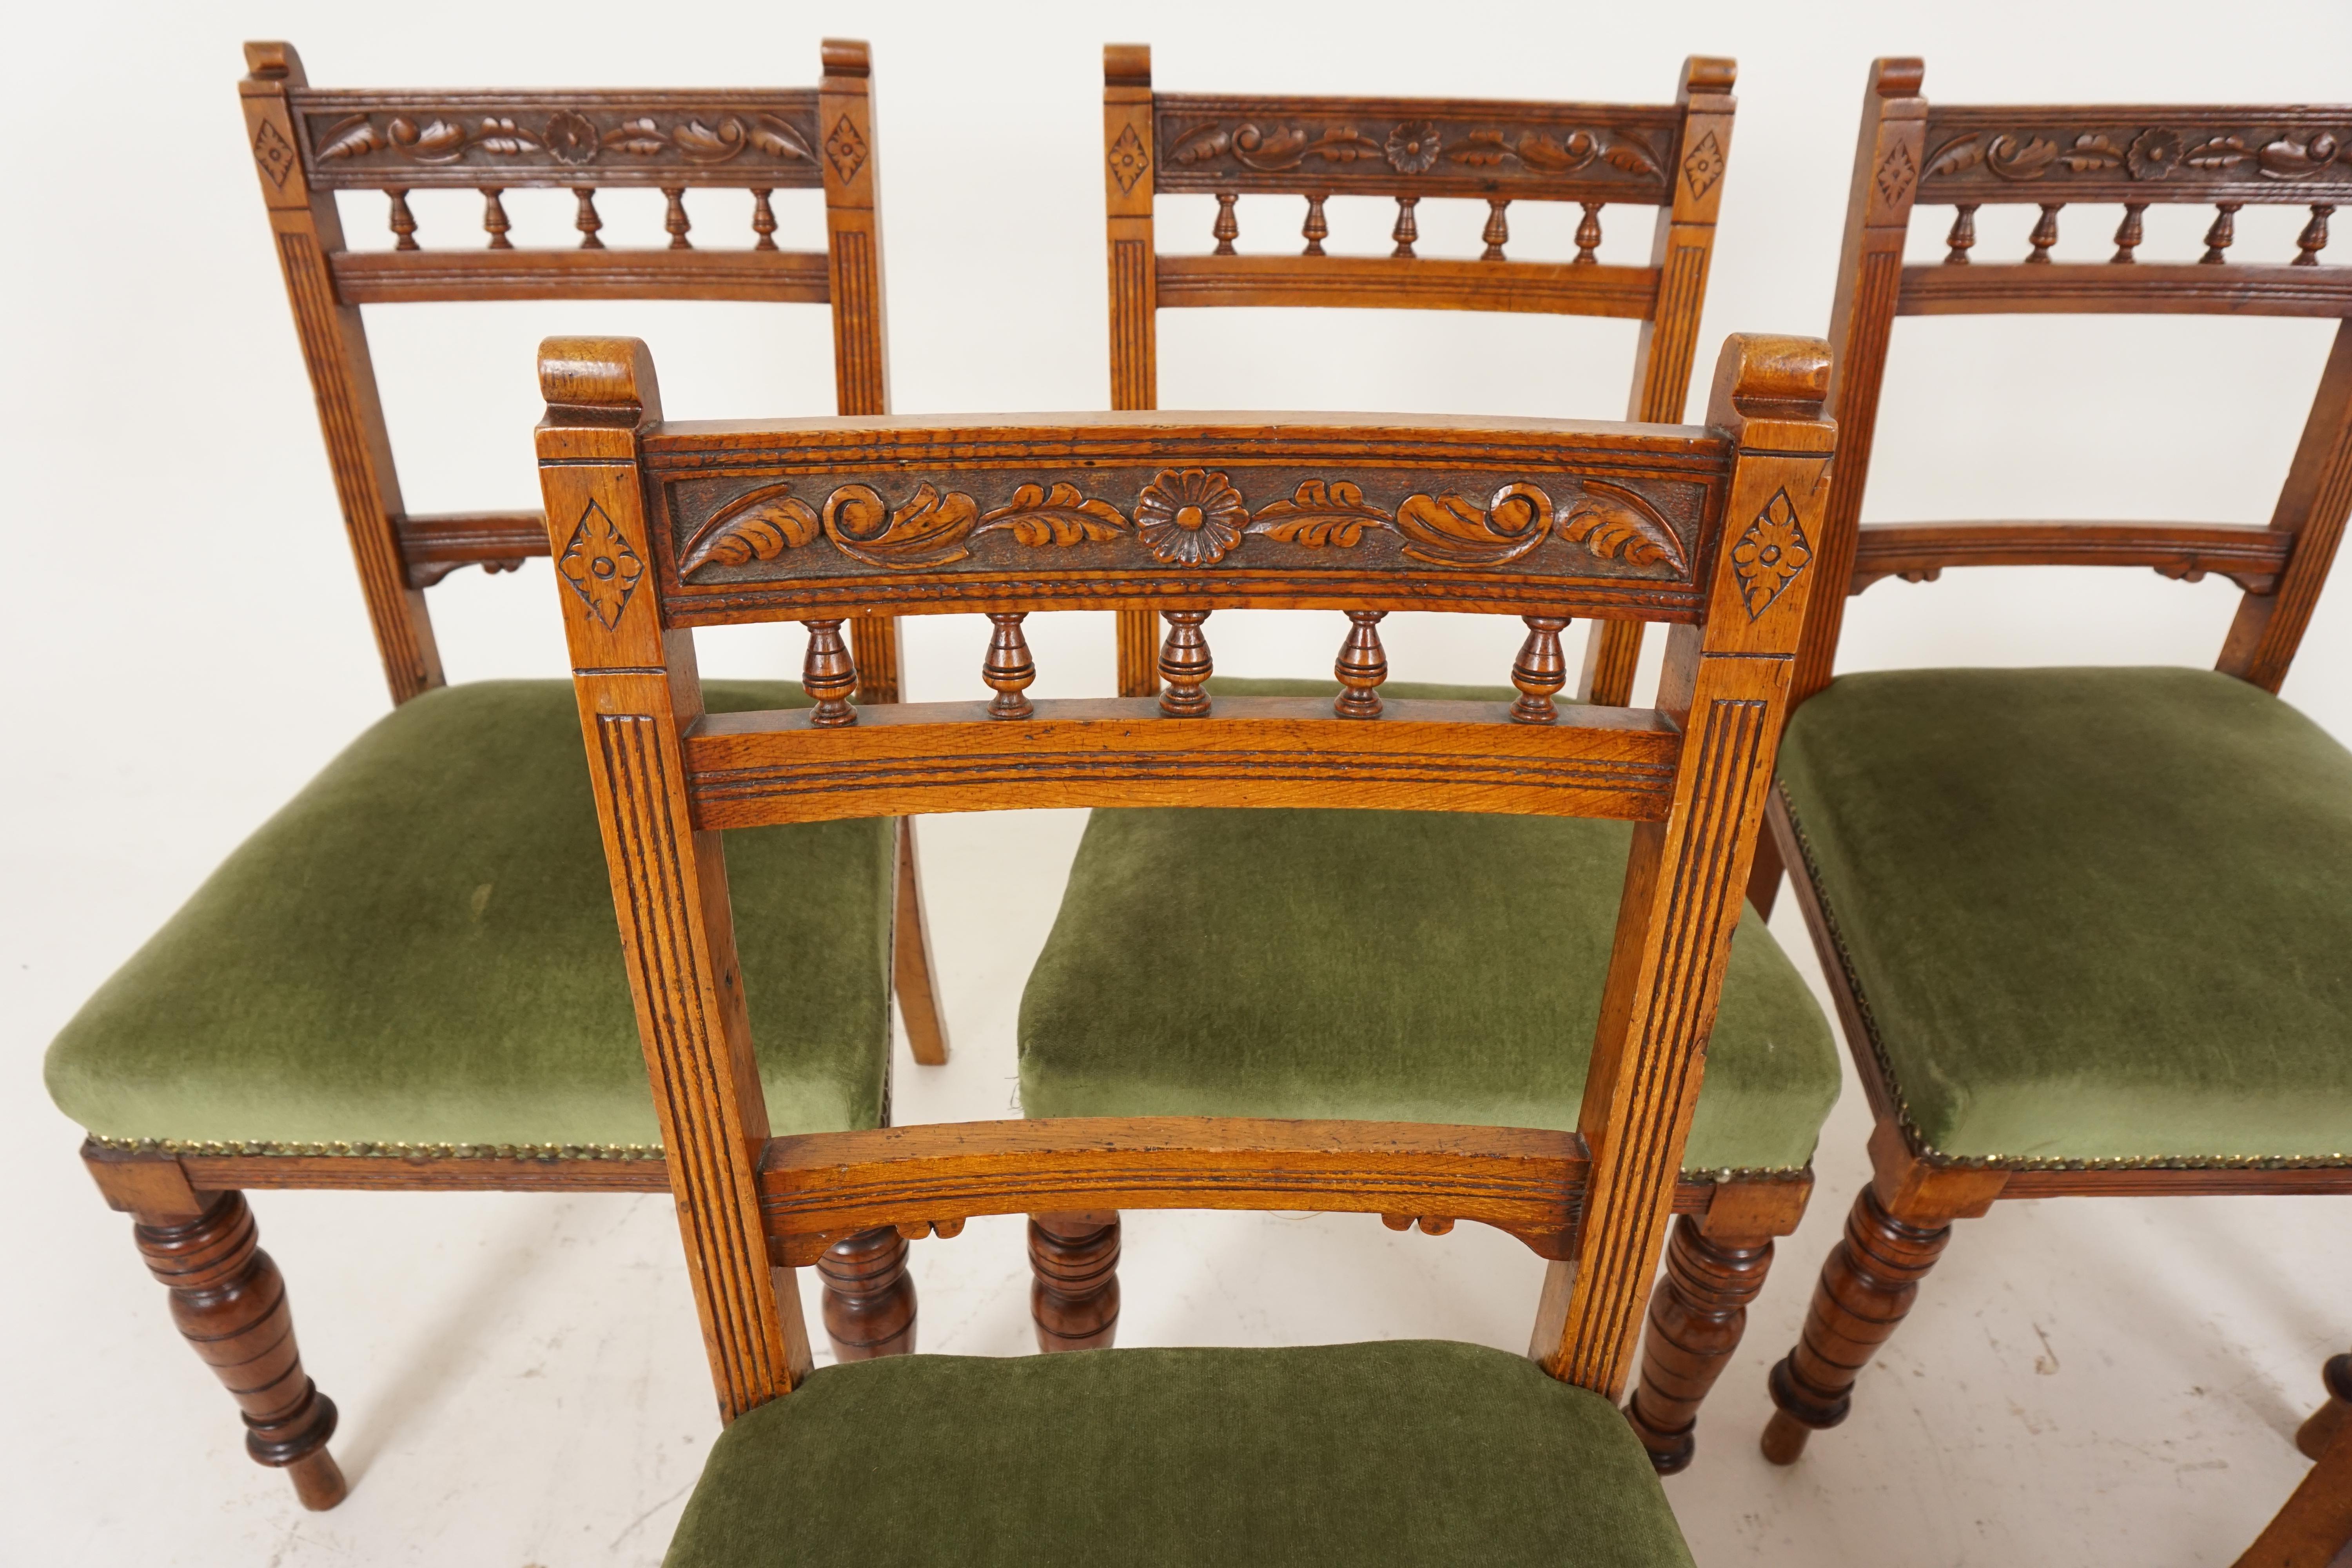 Scottish Antique Victorian Chairs, Set of 6 Carved Oak Dining Chairs, Scotland 1890 B2086